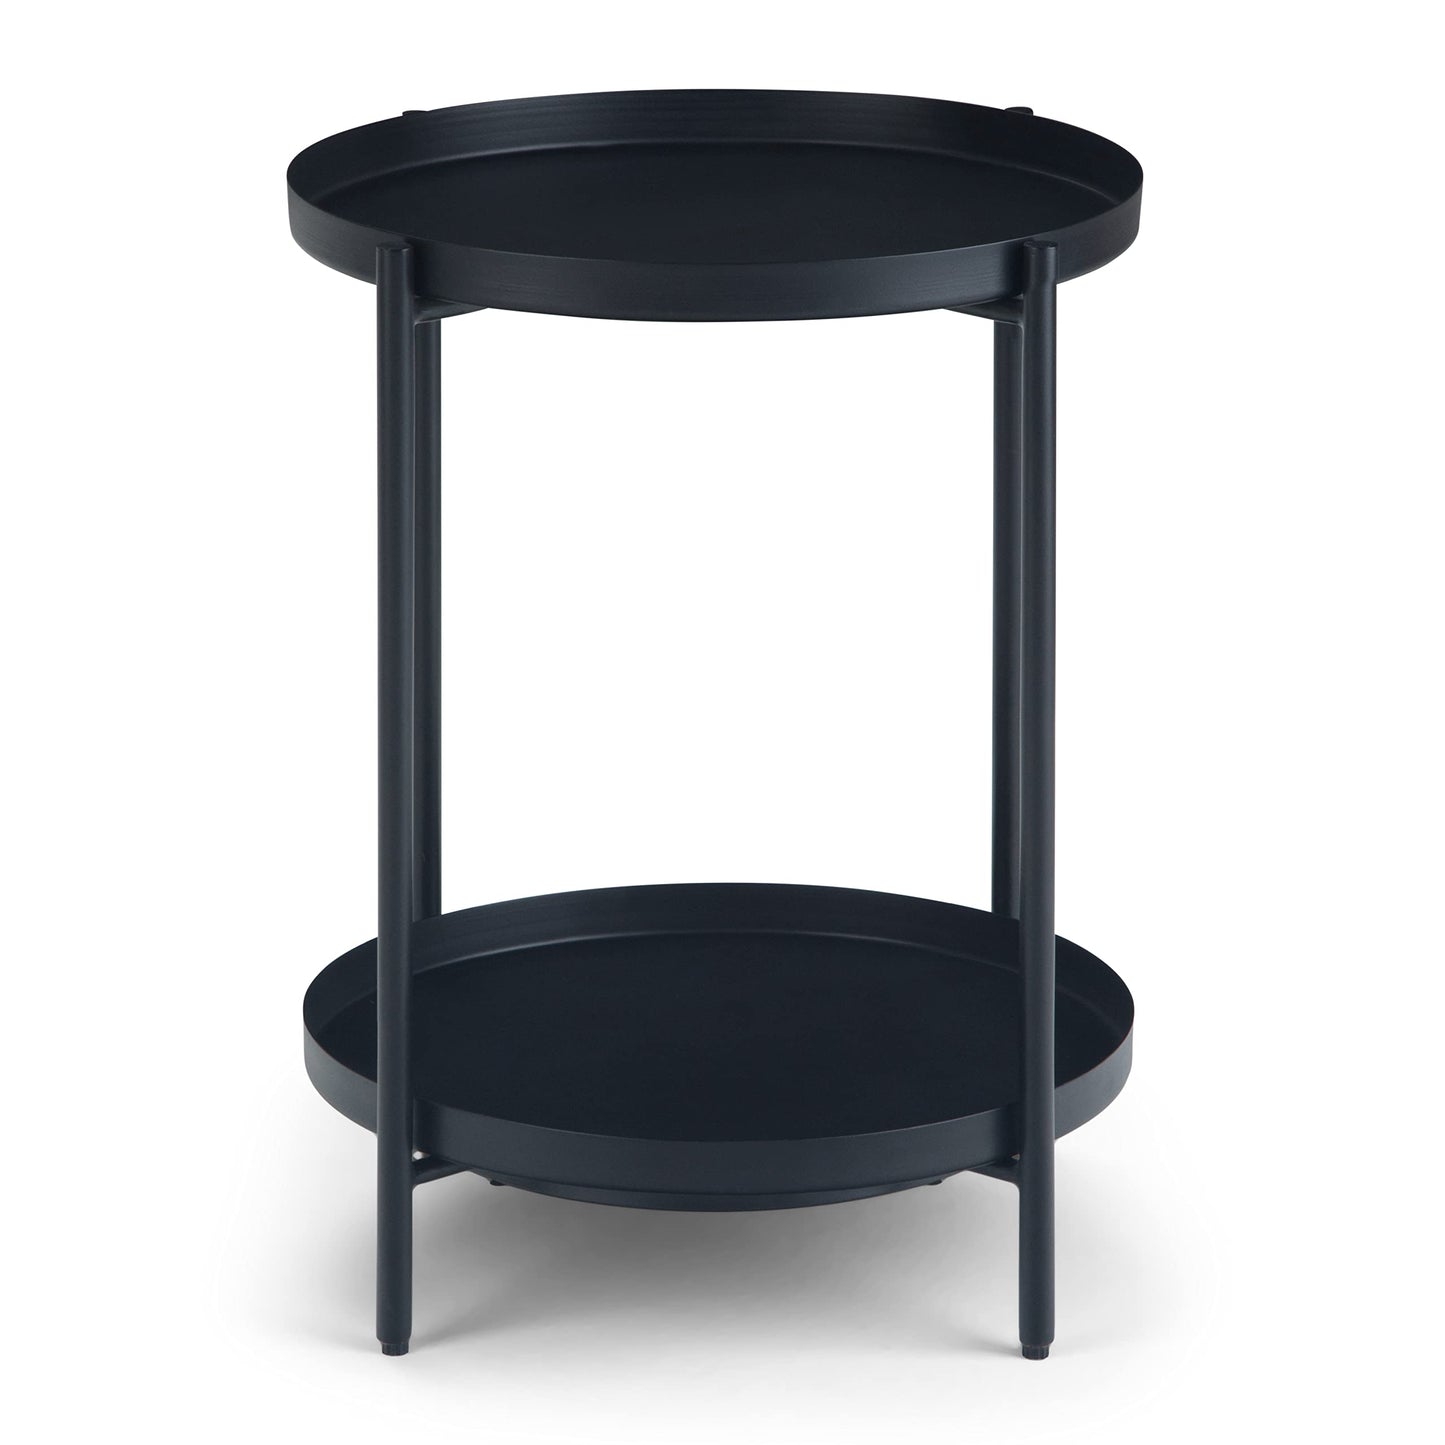 SIMPLIHOME Monet Industrial 17 Inch Wide Metal End Table in Black, For the Living Room and Bedroom